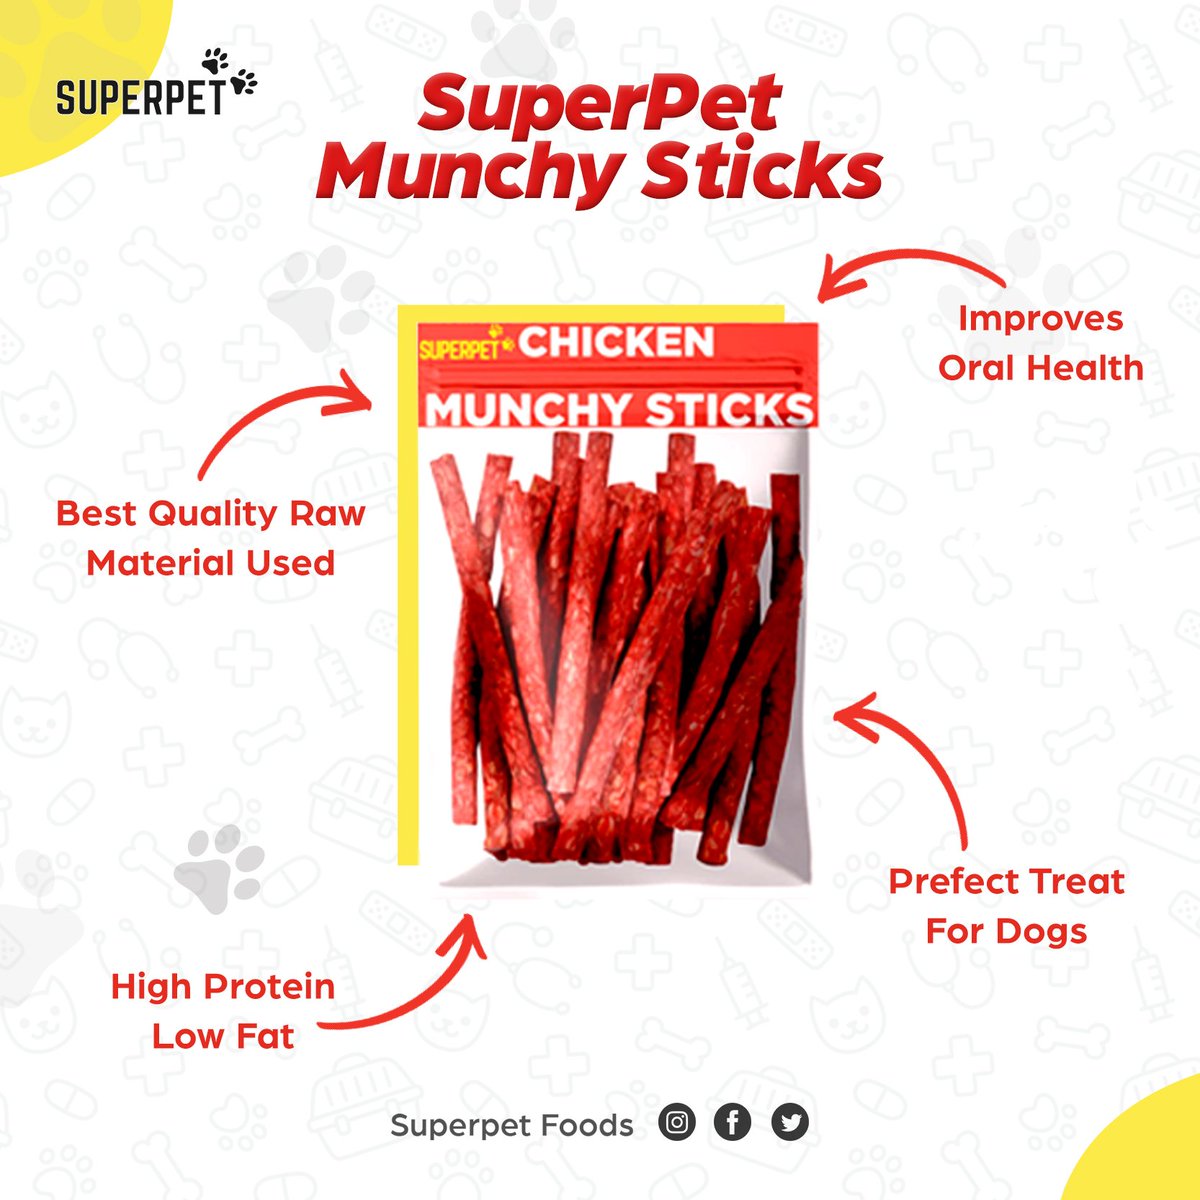 SuperPet Munchy Sticks - The wholesome goodness of a pure, nutritious, and highly digestible treat. 
 
#Superpet #Superpetindia #quotes #puppyfood #petfood #dogfood #catfood #kittenfood #pethealth #petcare #petnutrition #puppyhealth #puppycare #dogfood #dogcare #dogtreat